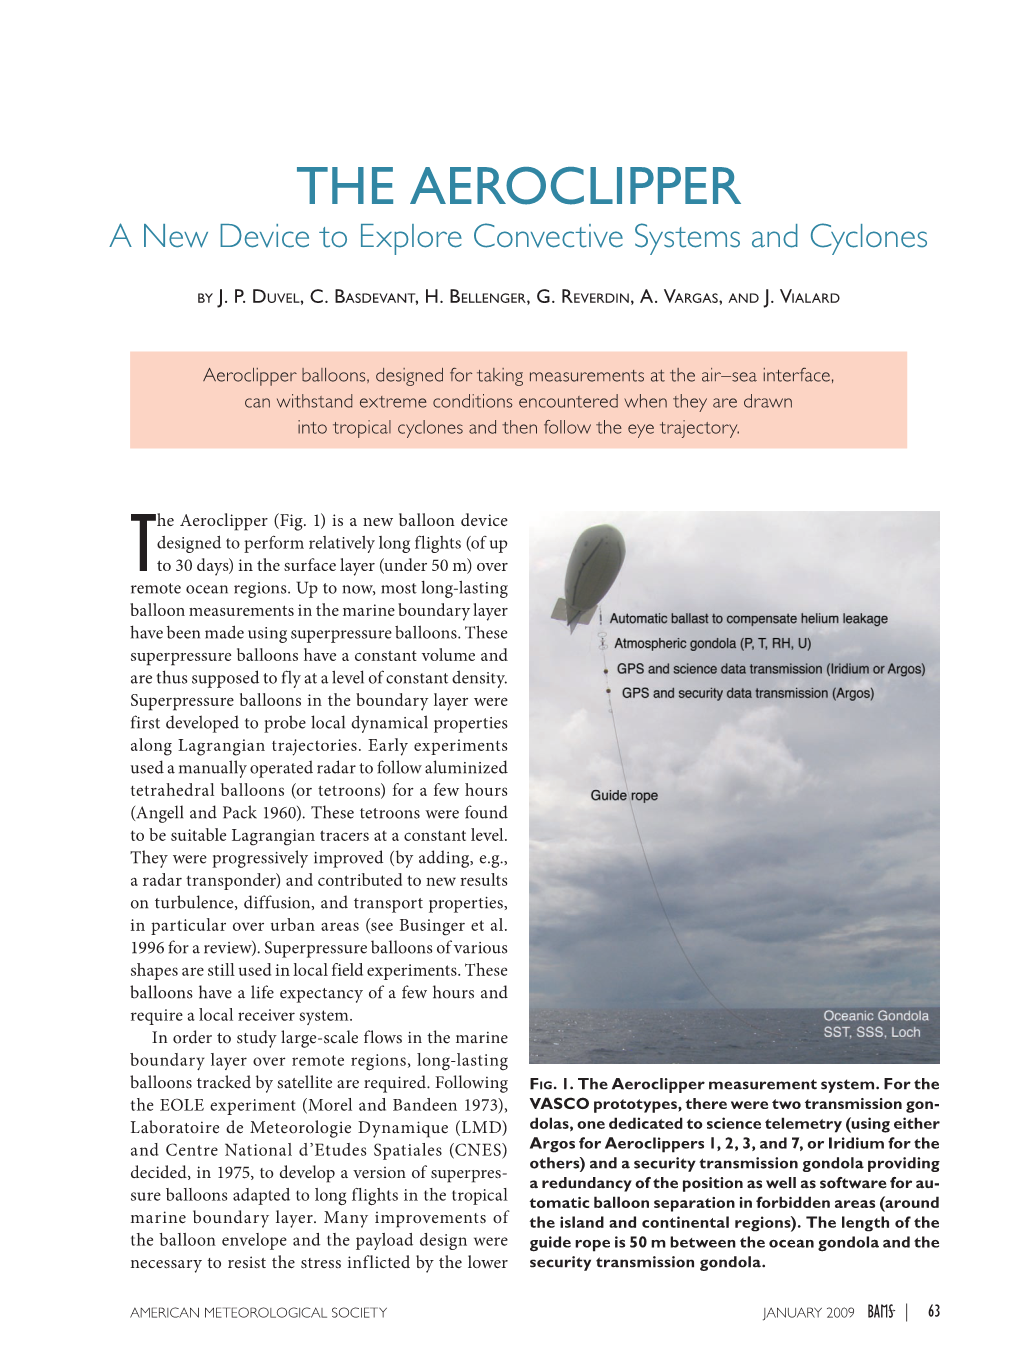 THE AEROCLIPPER a New Device to Explore Convective Systems and Cyclones